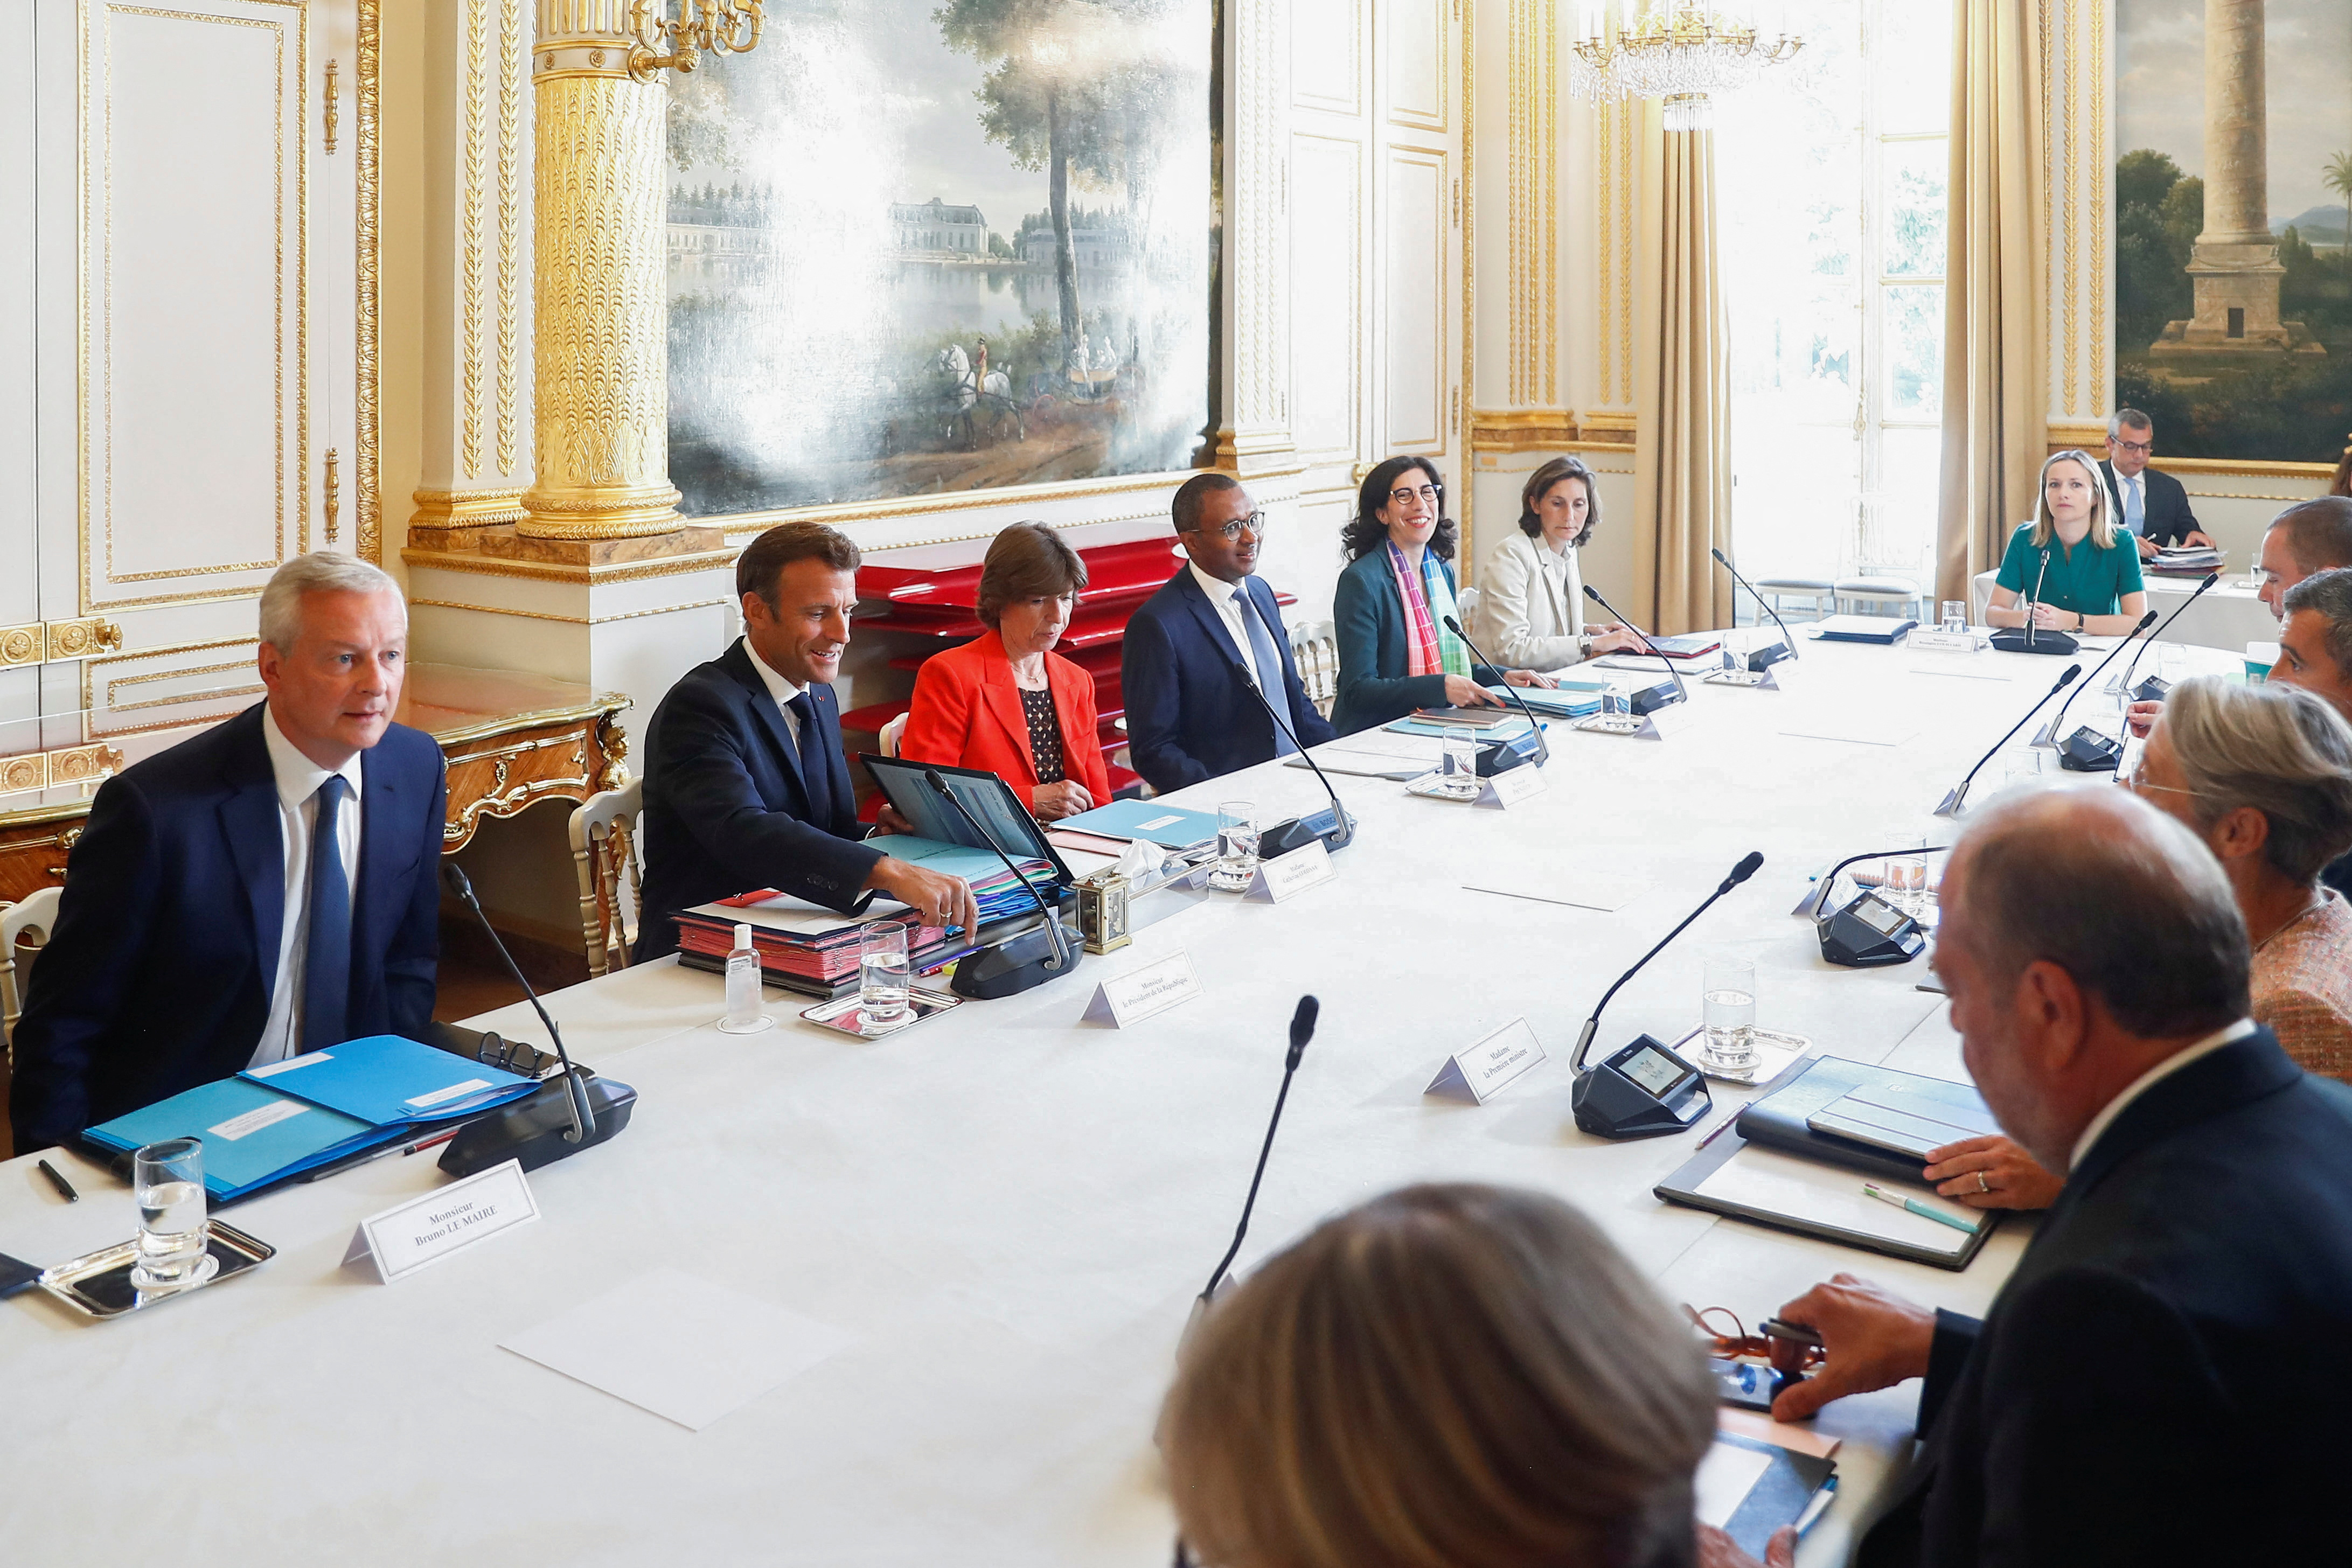 First French cabinet meeting after summer break